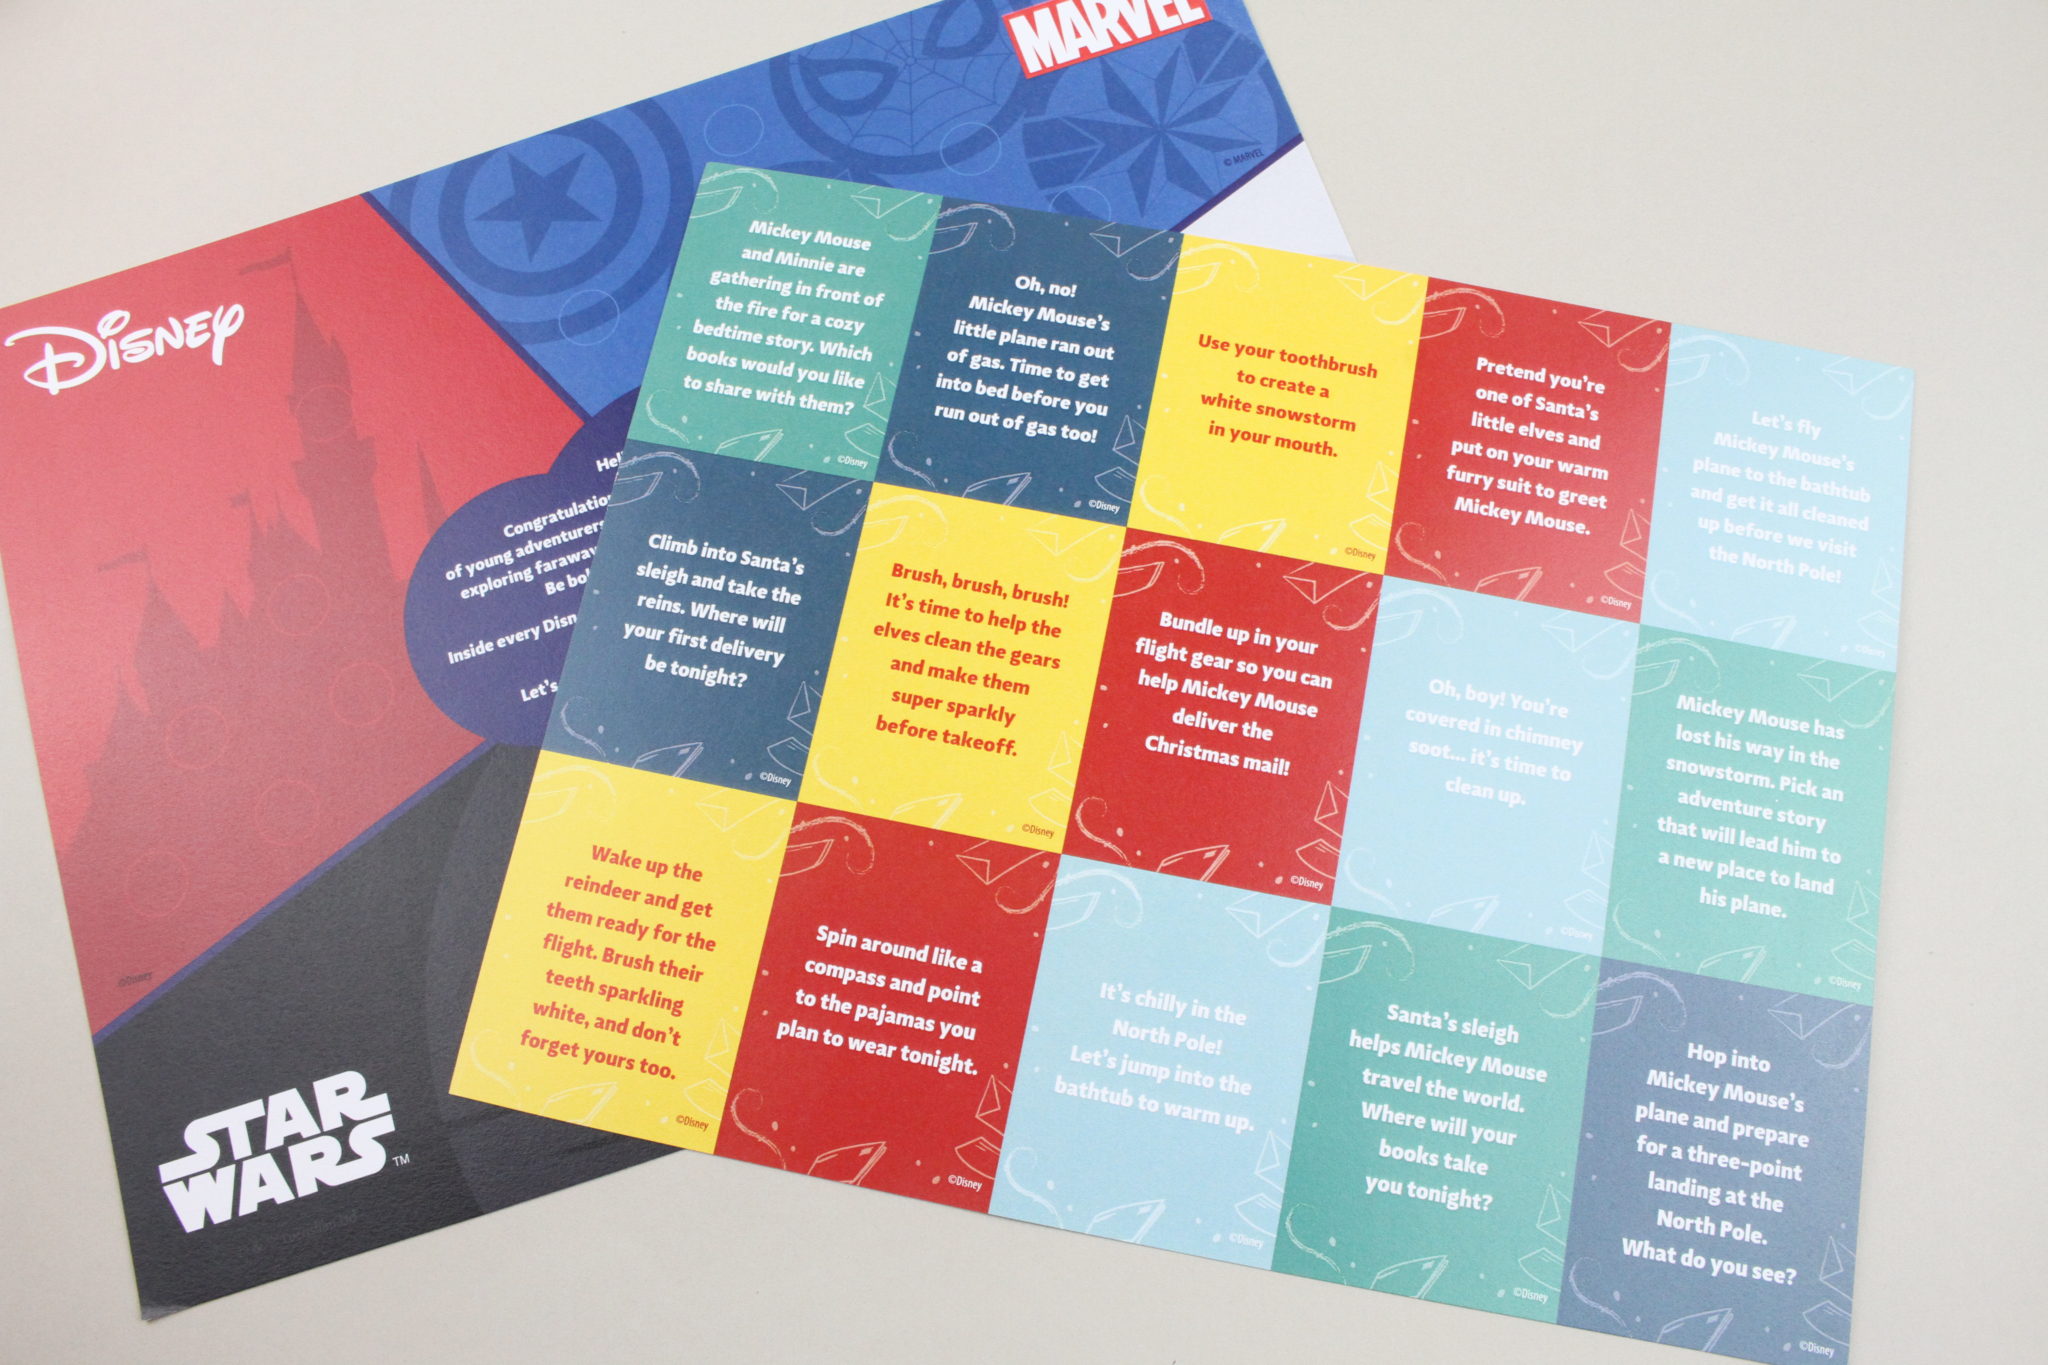 Stickers and Activity Cards